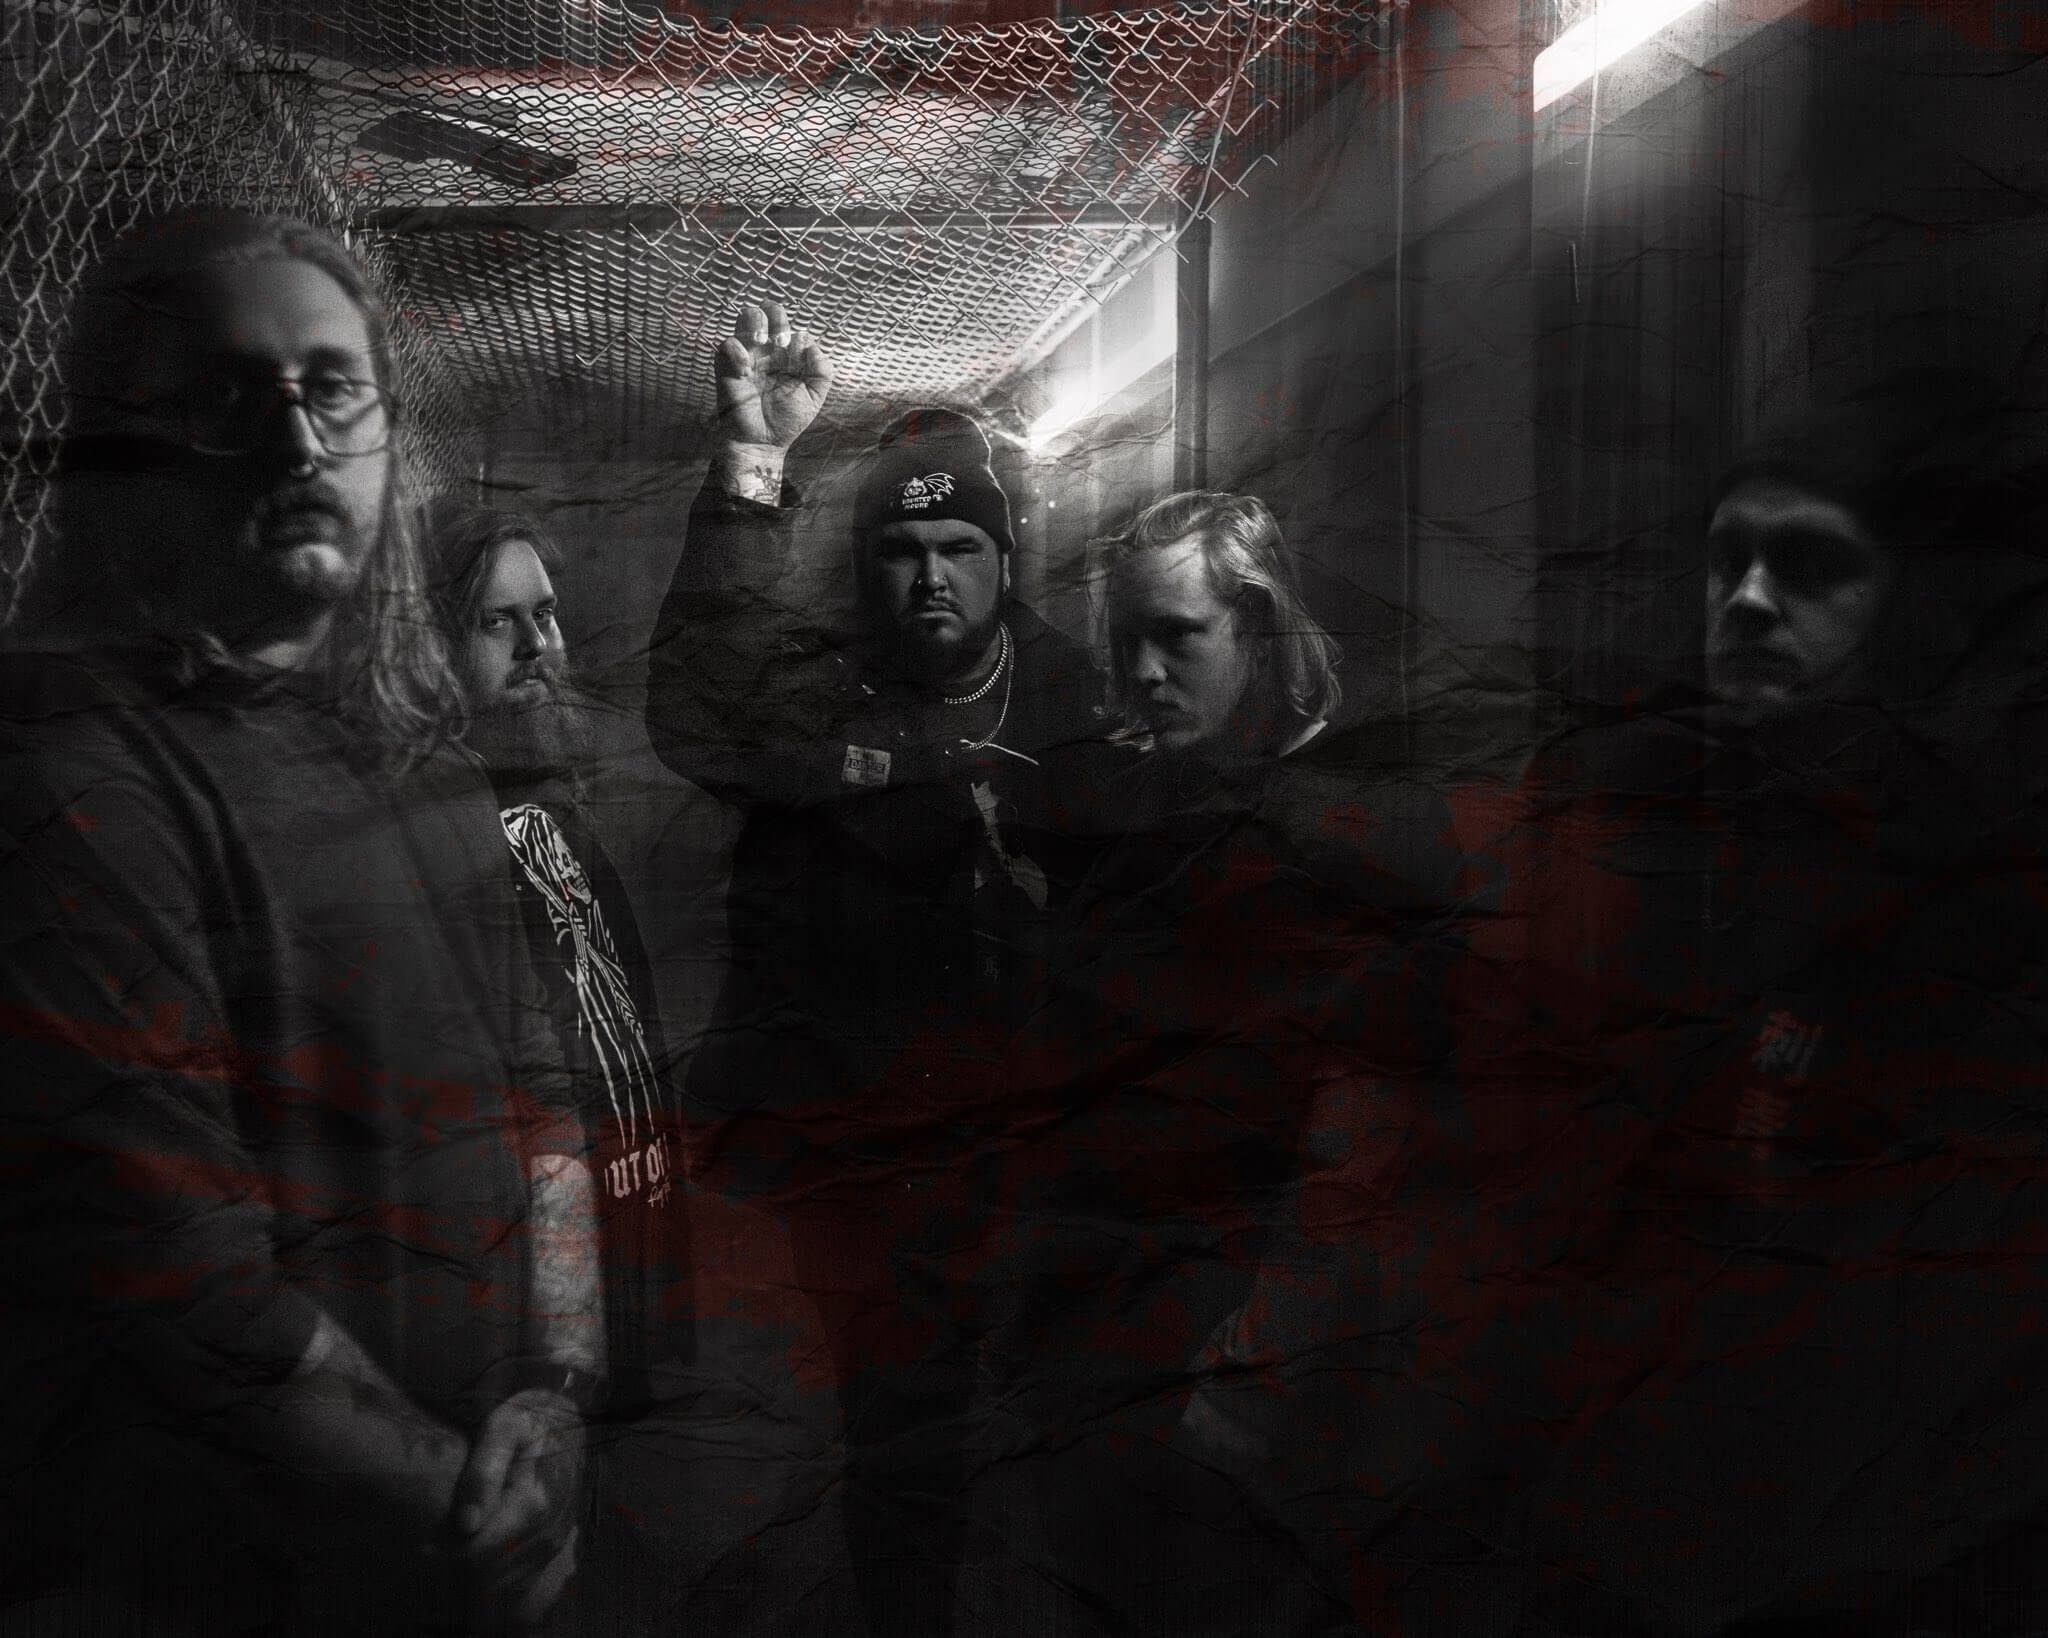 Left To Suffer Release New Music Video For “Consistent Suffering”